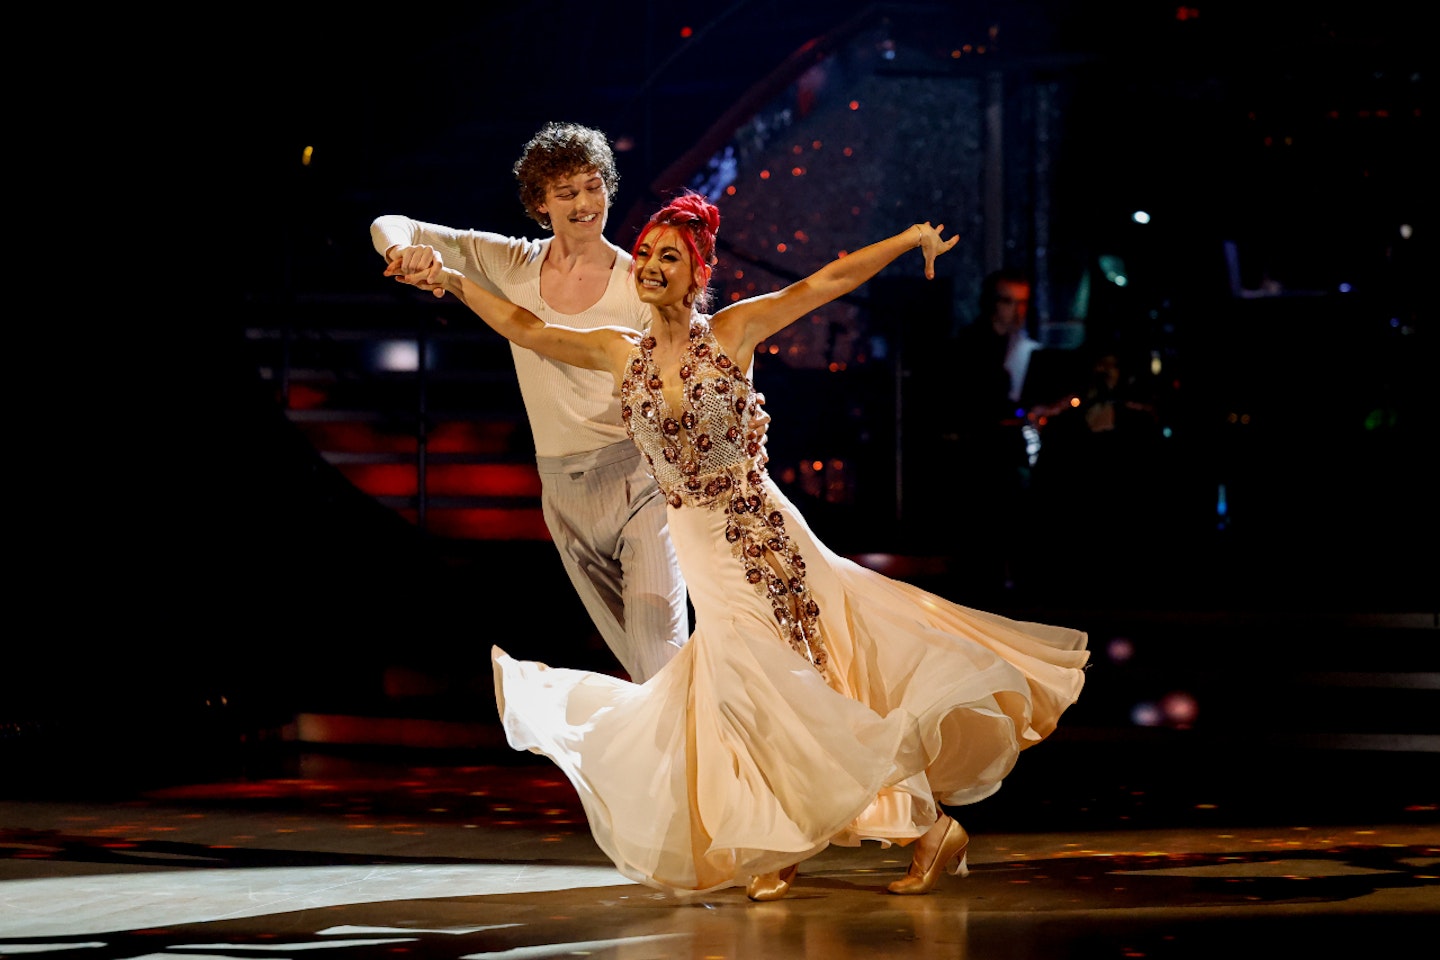 Bobby Brazier and Dianne on Strictly Come Dancing